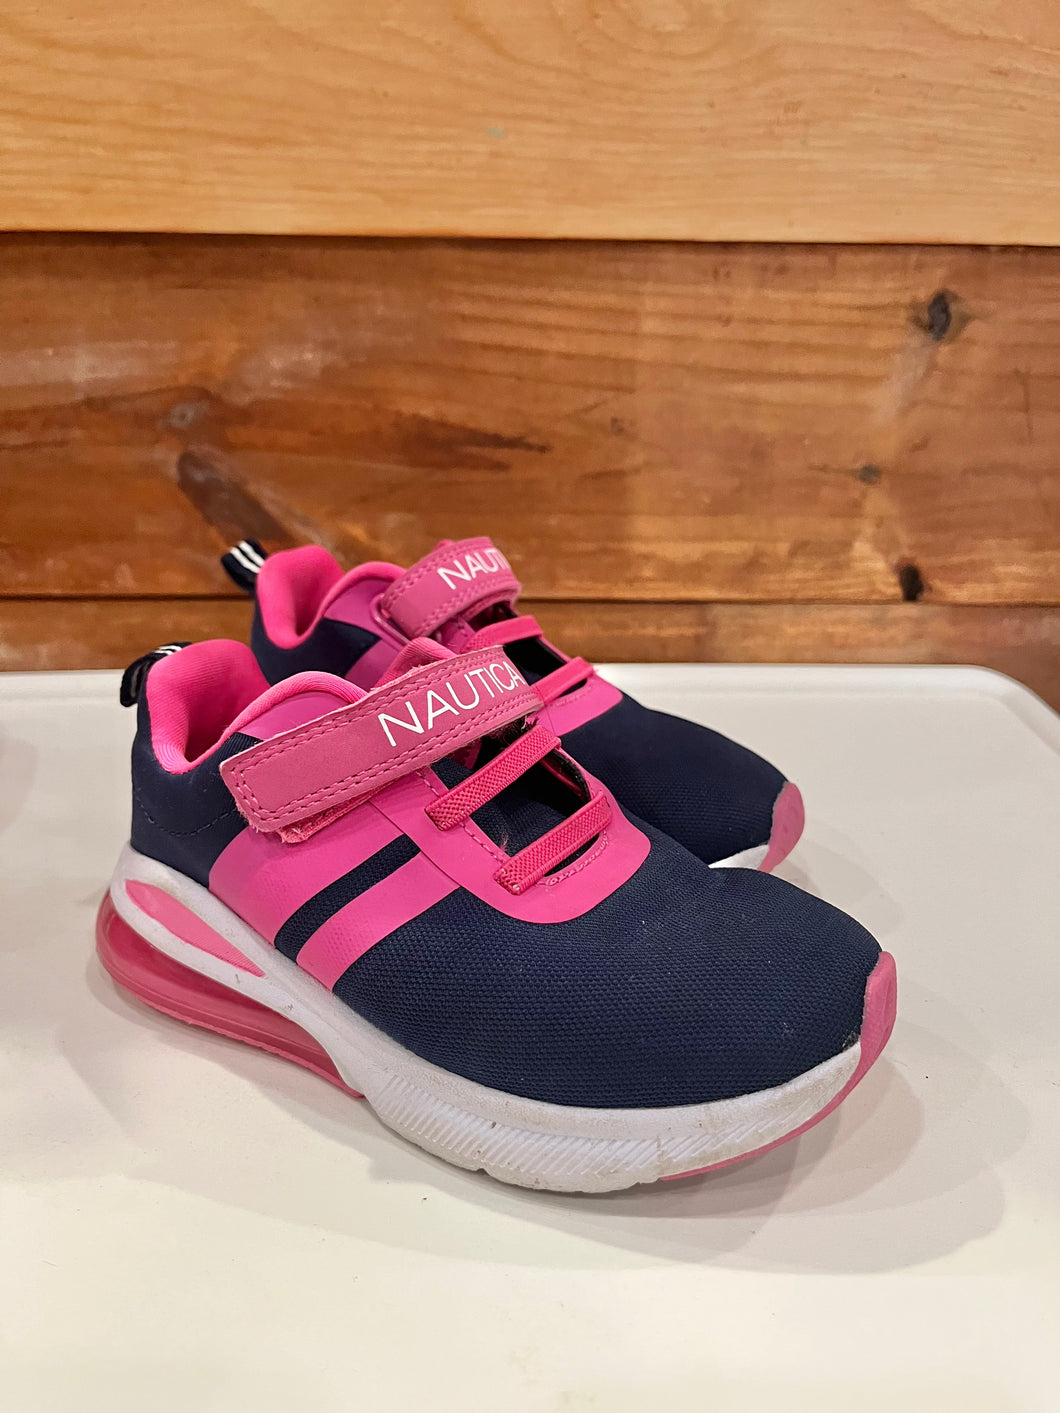 Nautica Blue & Pink Shoes Size 10